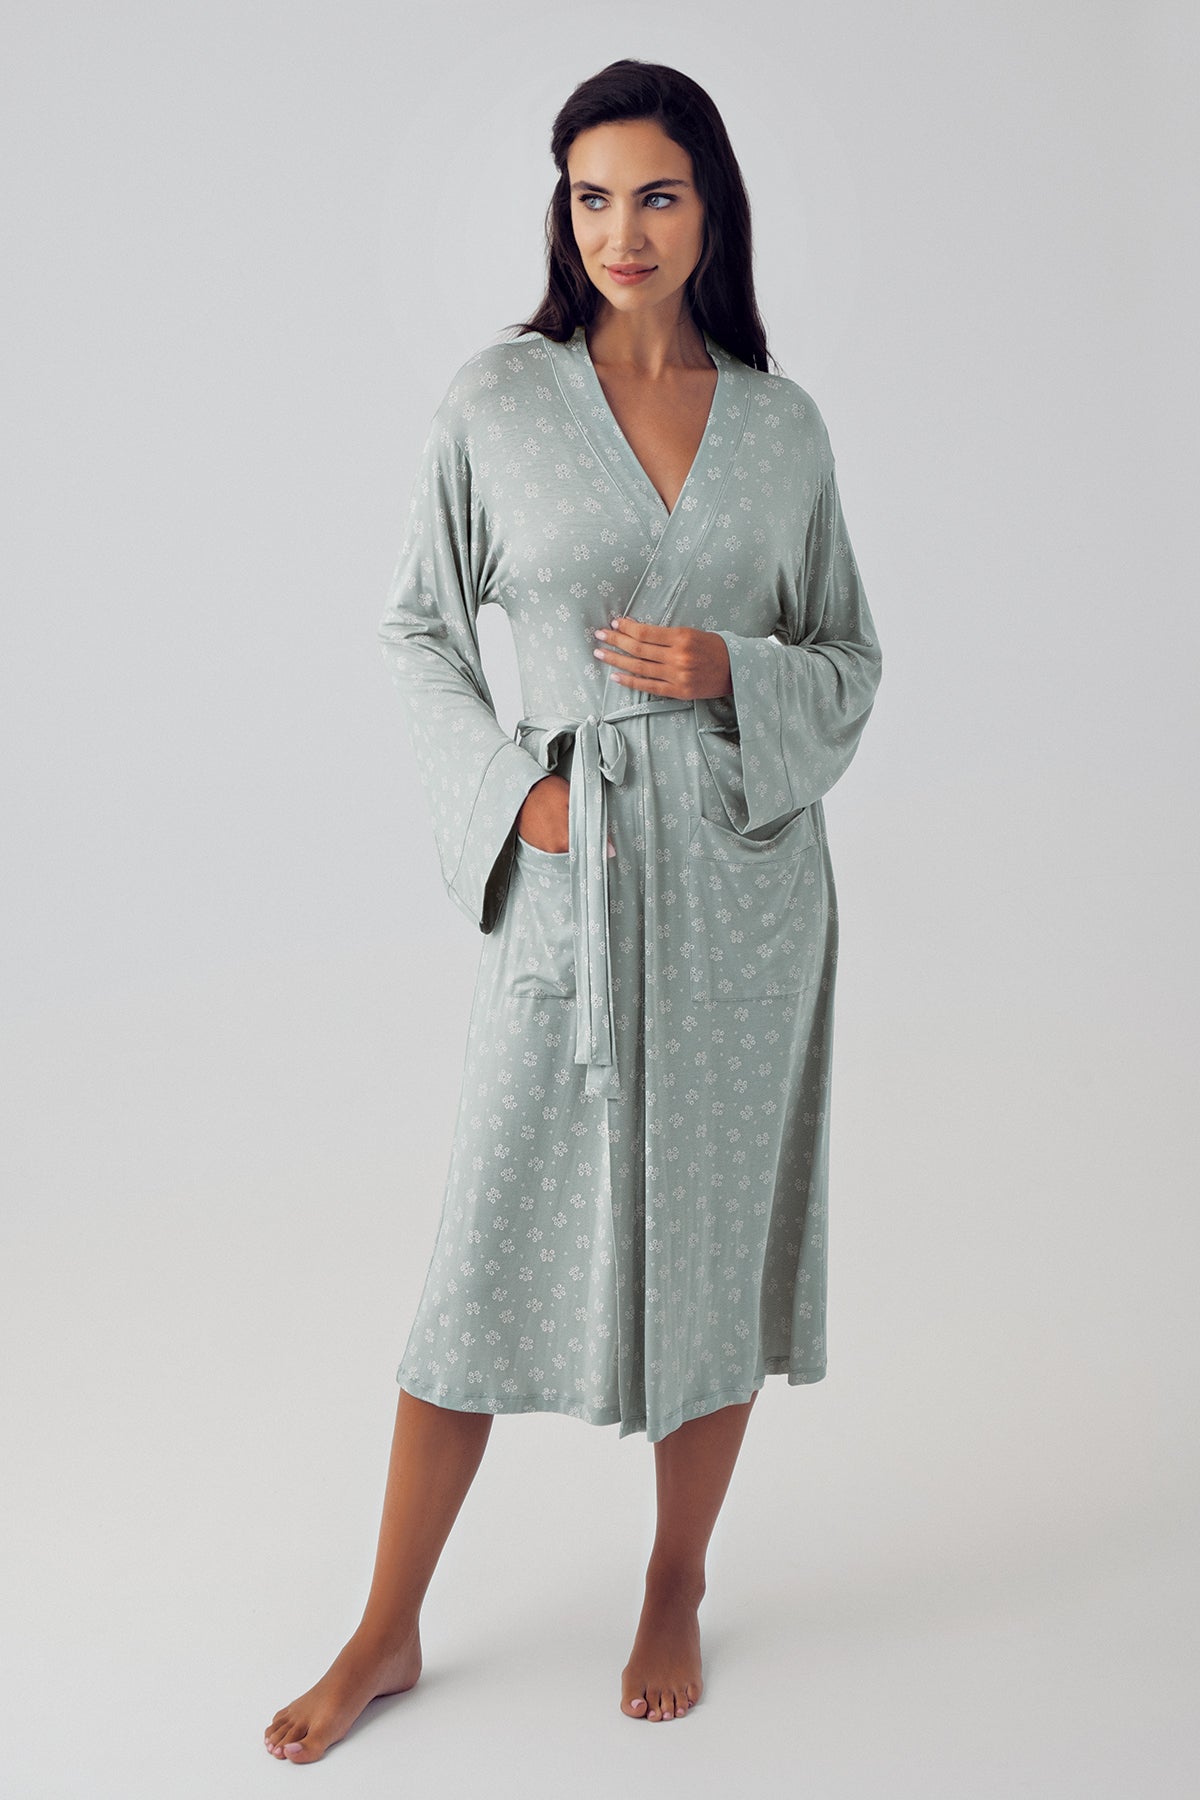 Shopymommy 15405 Cross Double Breasted Maternity & Nursing Nightgown With Patterned Robe Green